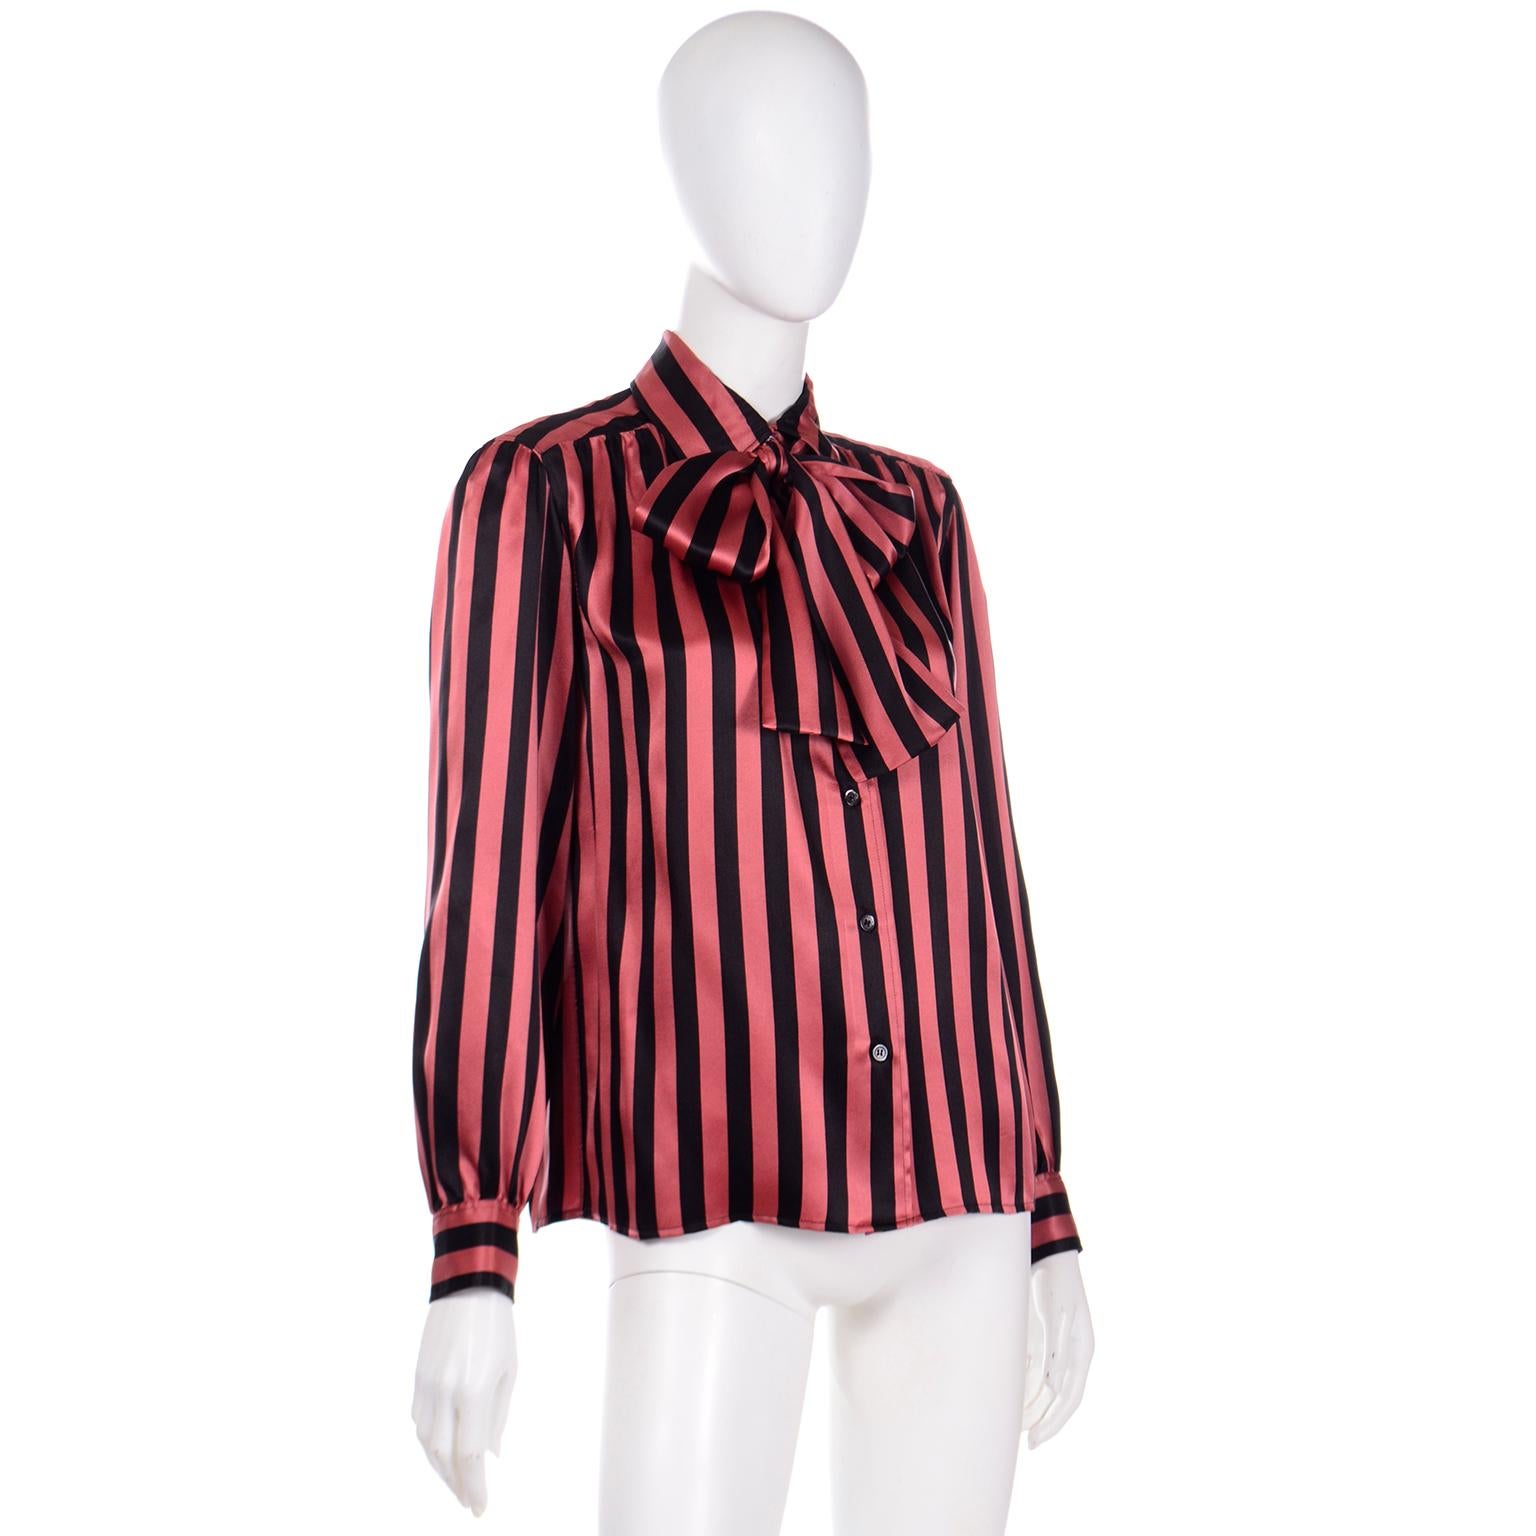 Yves Saint Laurent Orange & Black Striped Silk Vintage Blouse With Sash Bow In Excellent Condition For Sale In Portland, OR